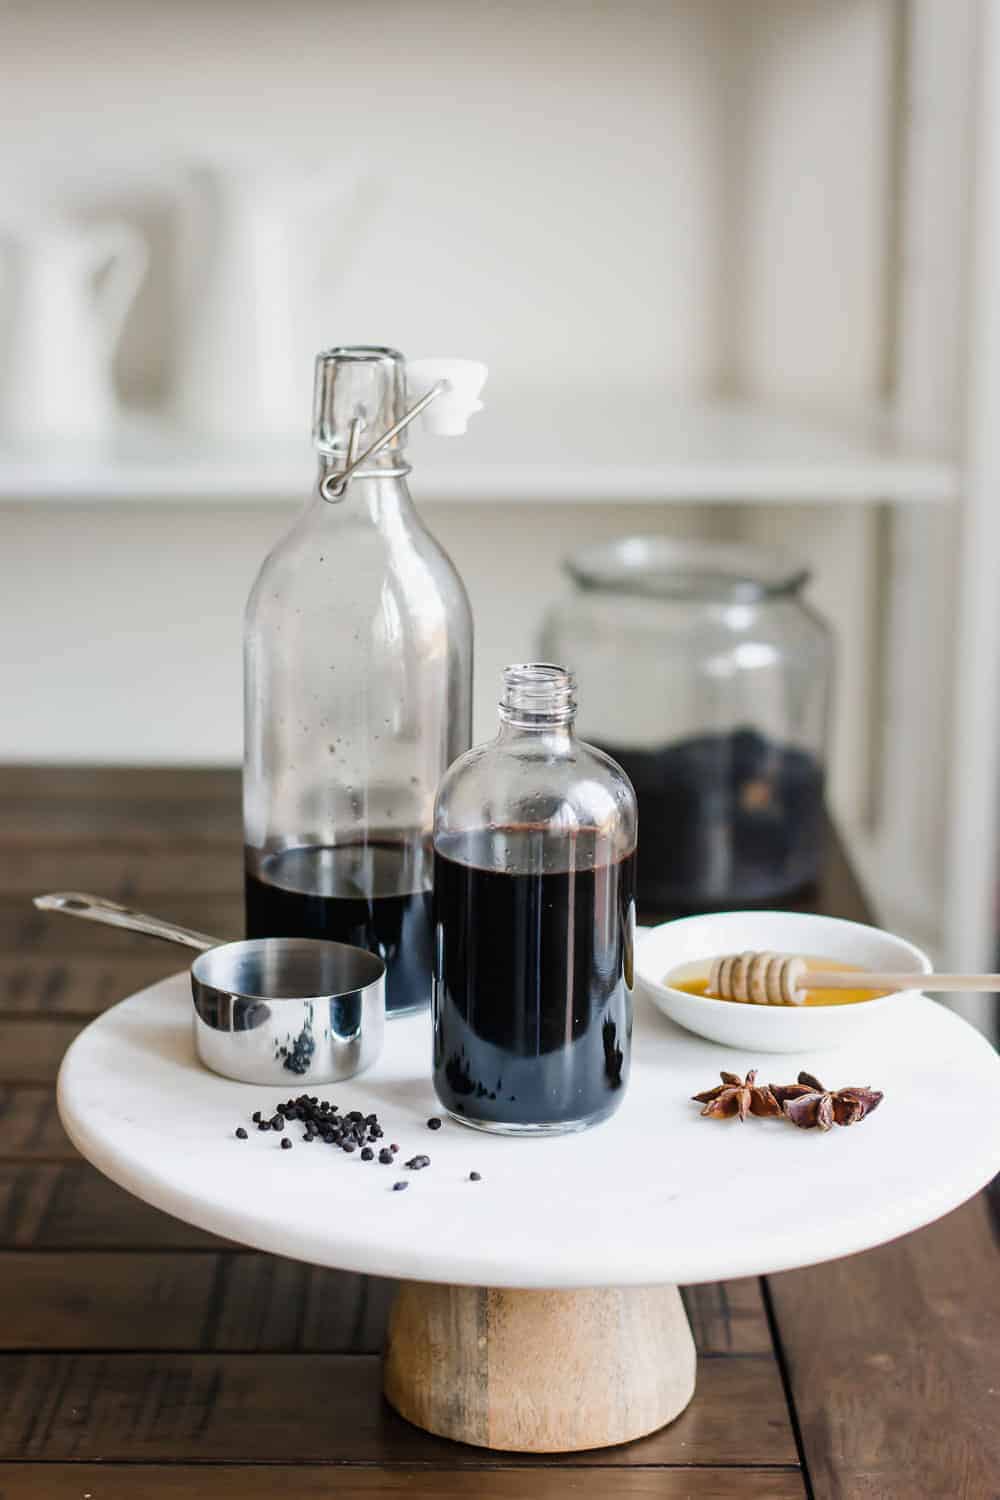 An easy Elderberry Syrup Recipe made with dried elderberries, echinacea, herbs, and honey. Great for colds and supporting the immune system when used medicinally, or used as a syrup for drinks or mixed in with maple syrup as a topping for food. || The Butter Half #elderberry #elderberrysyrup #naturalremedies #herbalremedies #holisticremedies #thebutterhalf